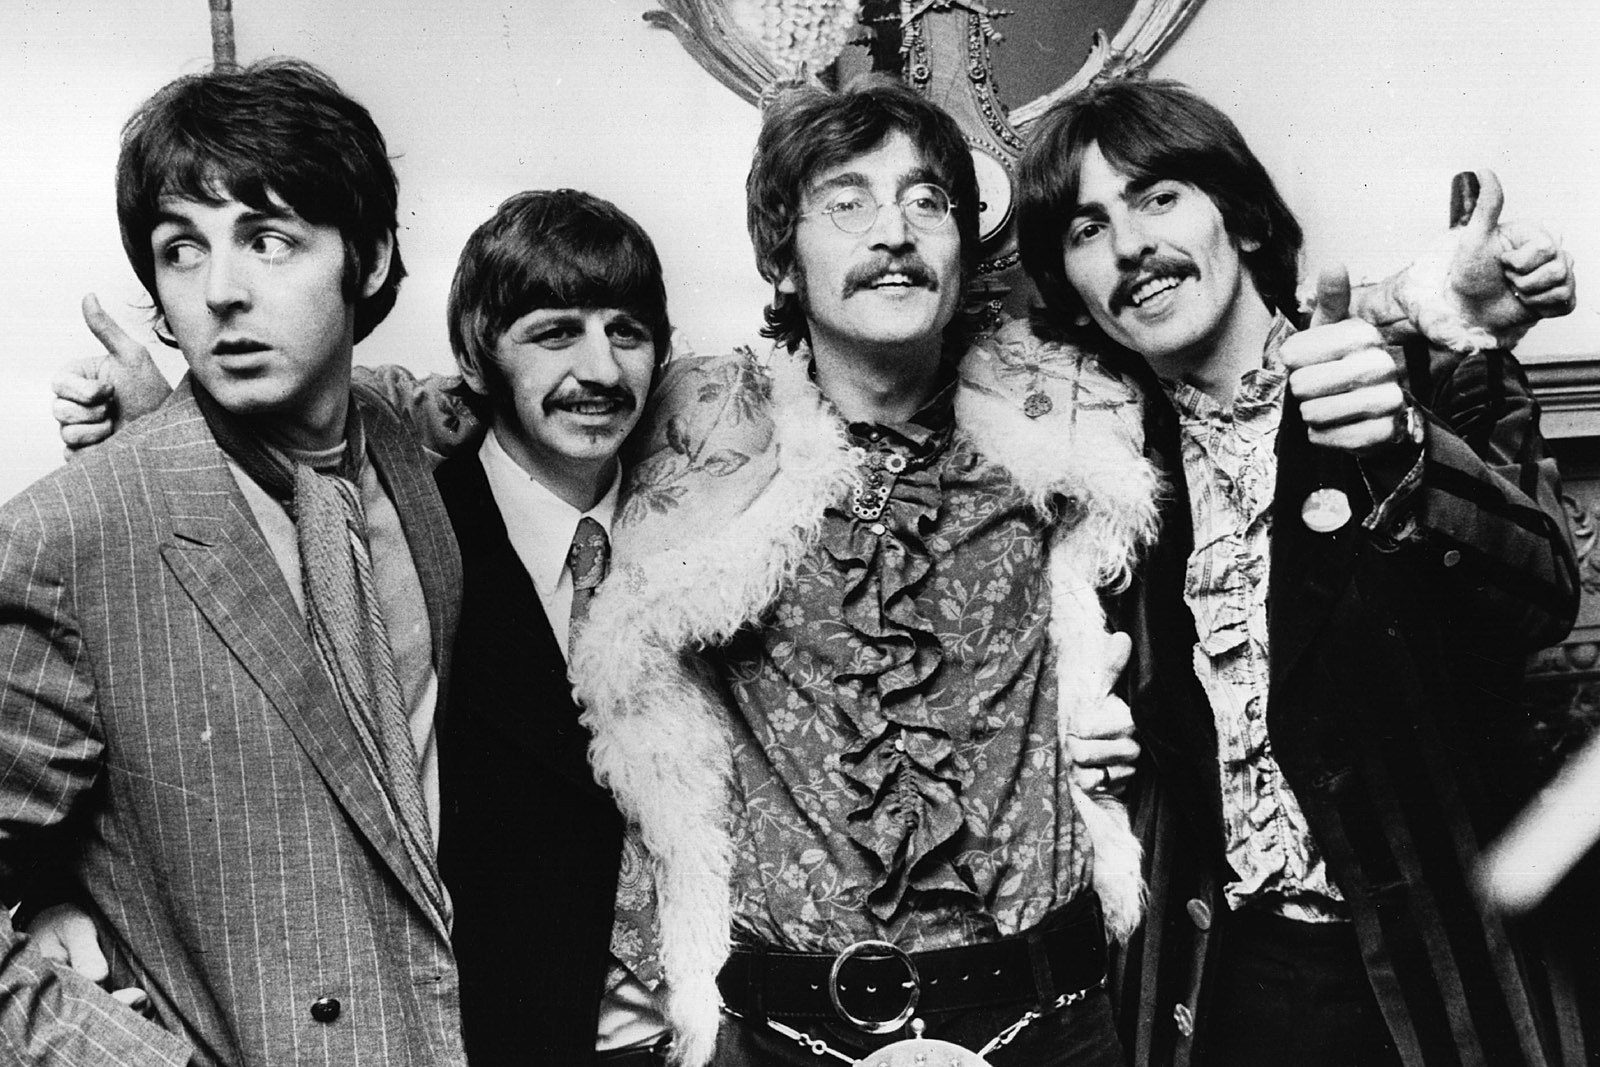 Beatles Weren't at War During White Album Sessions, Says Producer